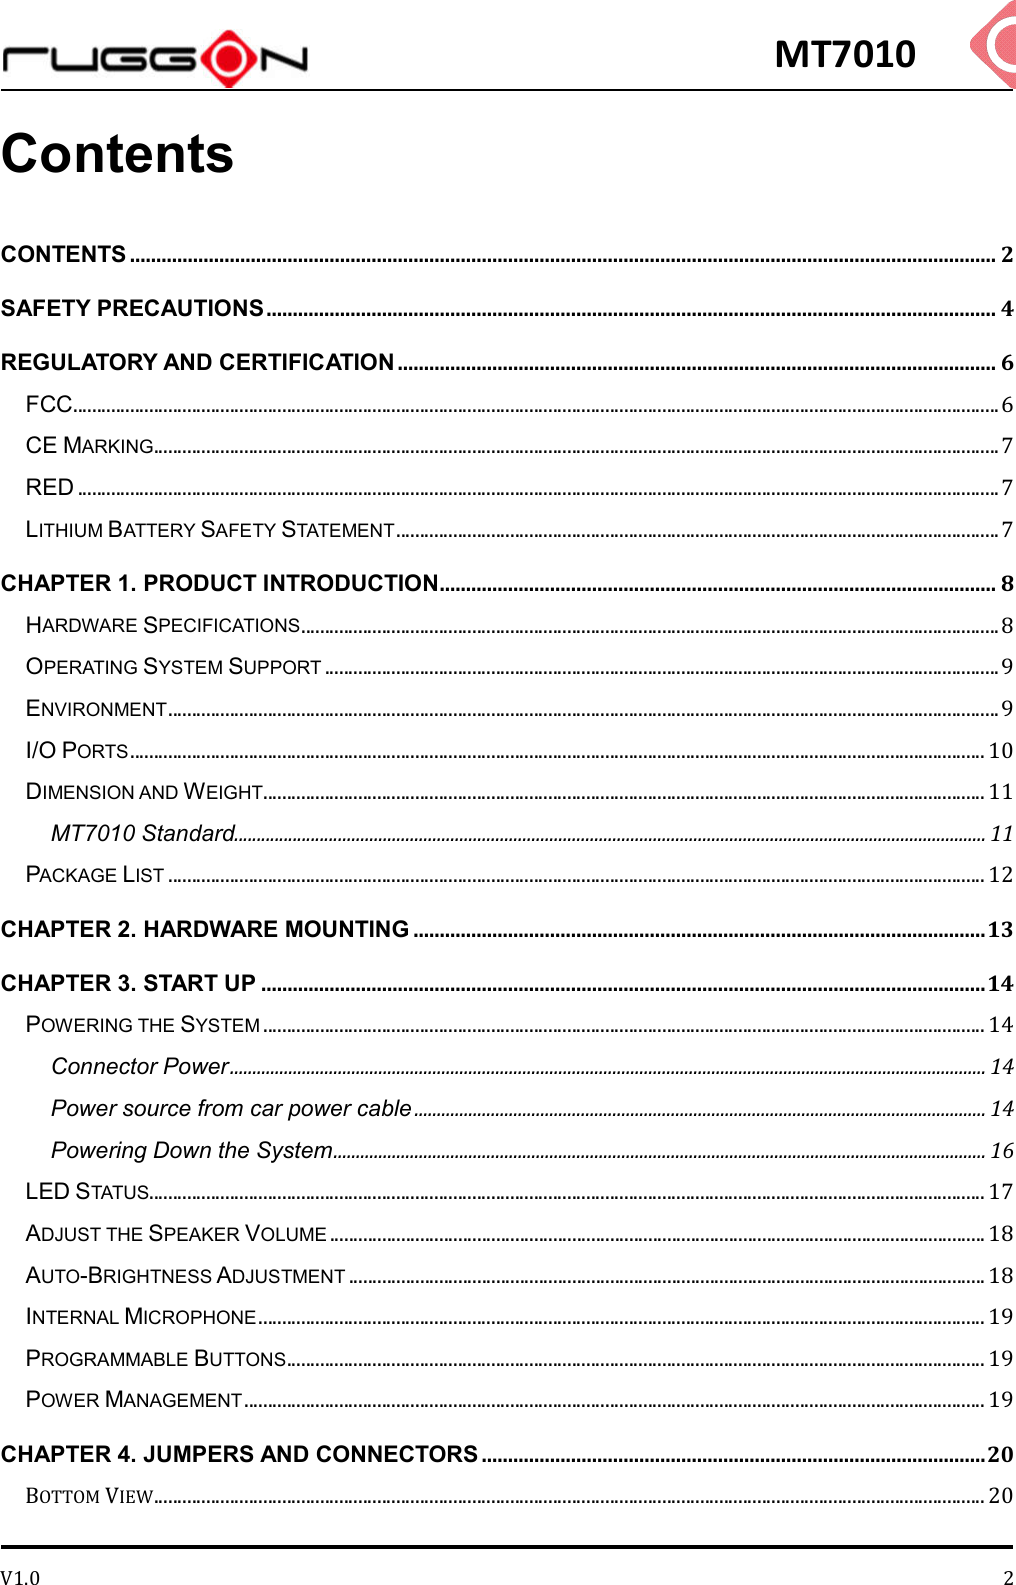 MT7010 V1.0 2Contents CONTENTS ..................................................................................................................................................................... 2 SAFETY PRECAUTIONS ........................................................................................................................................... 4 REGULATORY AND CERTIFICATION .................................................................................................................. 6 FCC ................................................................................................................................................................................................... 6 CE MARKING .................................................................................................................................................................................. 7 RED .................................................................................................................................................................................................. 7 LITHIUM BATTERY SAFETY STATEMENT ............................................................................................................................... 7 CHAPTER 1. PRODUCT INTRODUCTION .......................................................................................................... 8 HARDWARE SPECIFICATIONS ................................................................................................................................................... 8 OPERATING SYSTEM SUPPORT .............................................................................................................................................. 9 ENVIRONMENT ............................................................................................................................................................................... 9 I/O PORTS .................................................................................................................................................................................... 10 DIMENSION AND WEIGHT ........................................................................................................................................................ 11 MT7010 Standard ....................................................................................................................................................................... 11 PACKAGE LIST ............................................................................................................................................................................ 12 CHAPTER 2. HARDWARE MOUNTING ............................................................................................................. 13 CHAPTER 3. START UP .......................................................................................................................................... 14 POWERING THE SYSTEM ........................................................................................................................................................ 14 Connector Power ........................................................................................................................................................................ 14 Power source from car power cable ............................................................................................................................... 14 Powering Down the System ................................................................................................................................................. 16 LED STATUS................................................................................................................................................................................ 17 ADJUST THE SPEAKER VOLUME .......................................................................................................................................... 18 AUTO-BRIGHTNESS ADJUSTMENT ...................................................................................................................................... 18 INTERNAL MICROPHONE ......................................................................................................................................................... 19 PROGRAMMABLE BUTTONS ................................................................................................................................................... 19 POWER MANAGEMENT ............................................................................................................................................................ 19 CHAPTER 4. JUMPERS AND CONNECTORS ................................................................................................ 20 BOTTOM VIEW ............................................................................................................................................................................... 20 